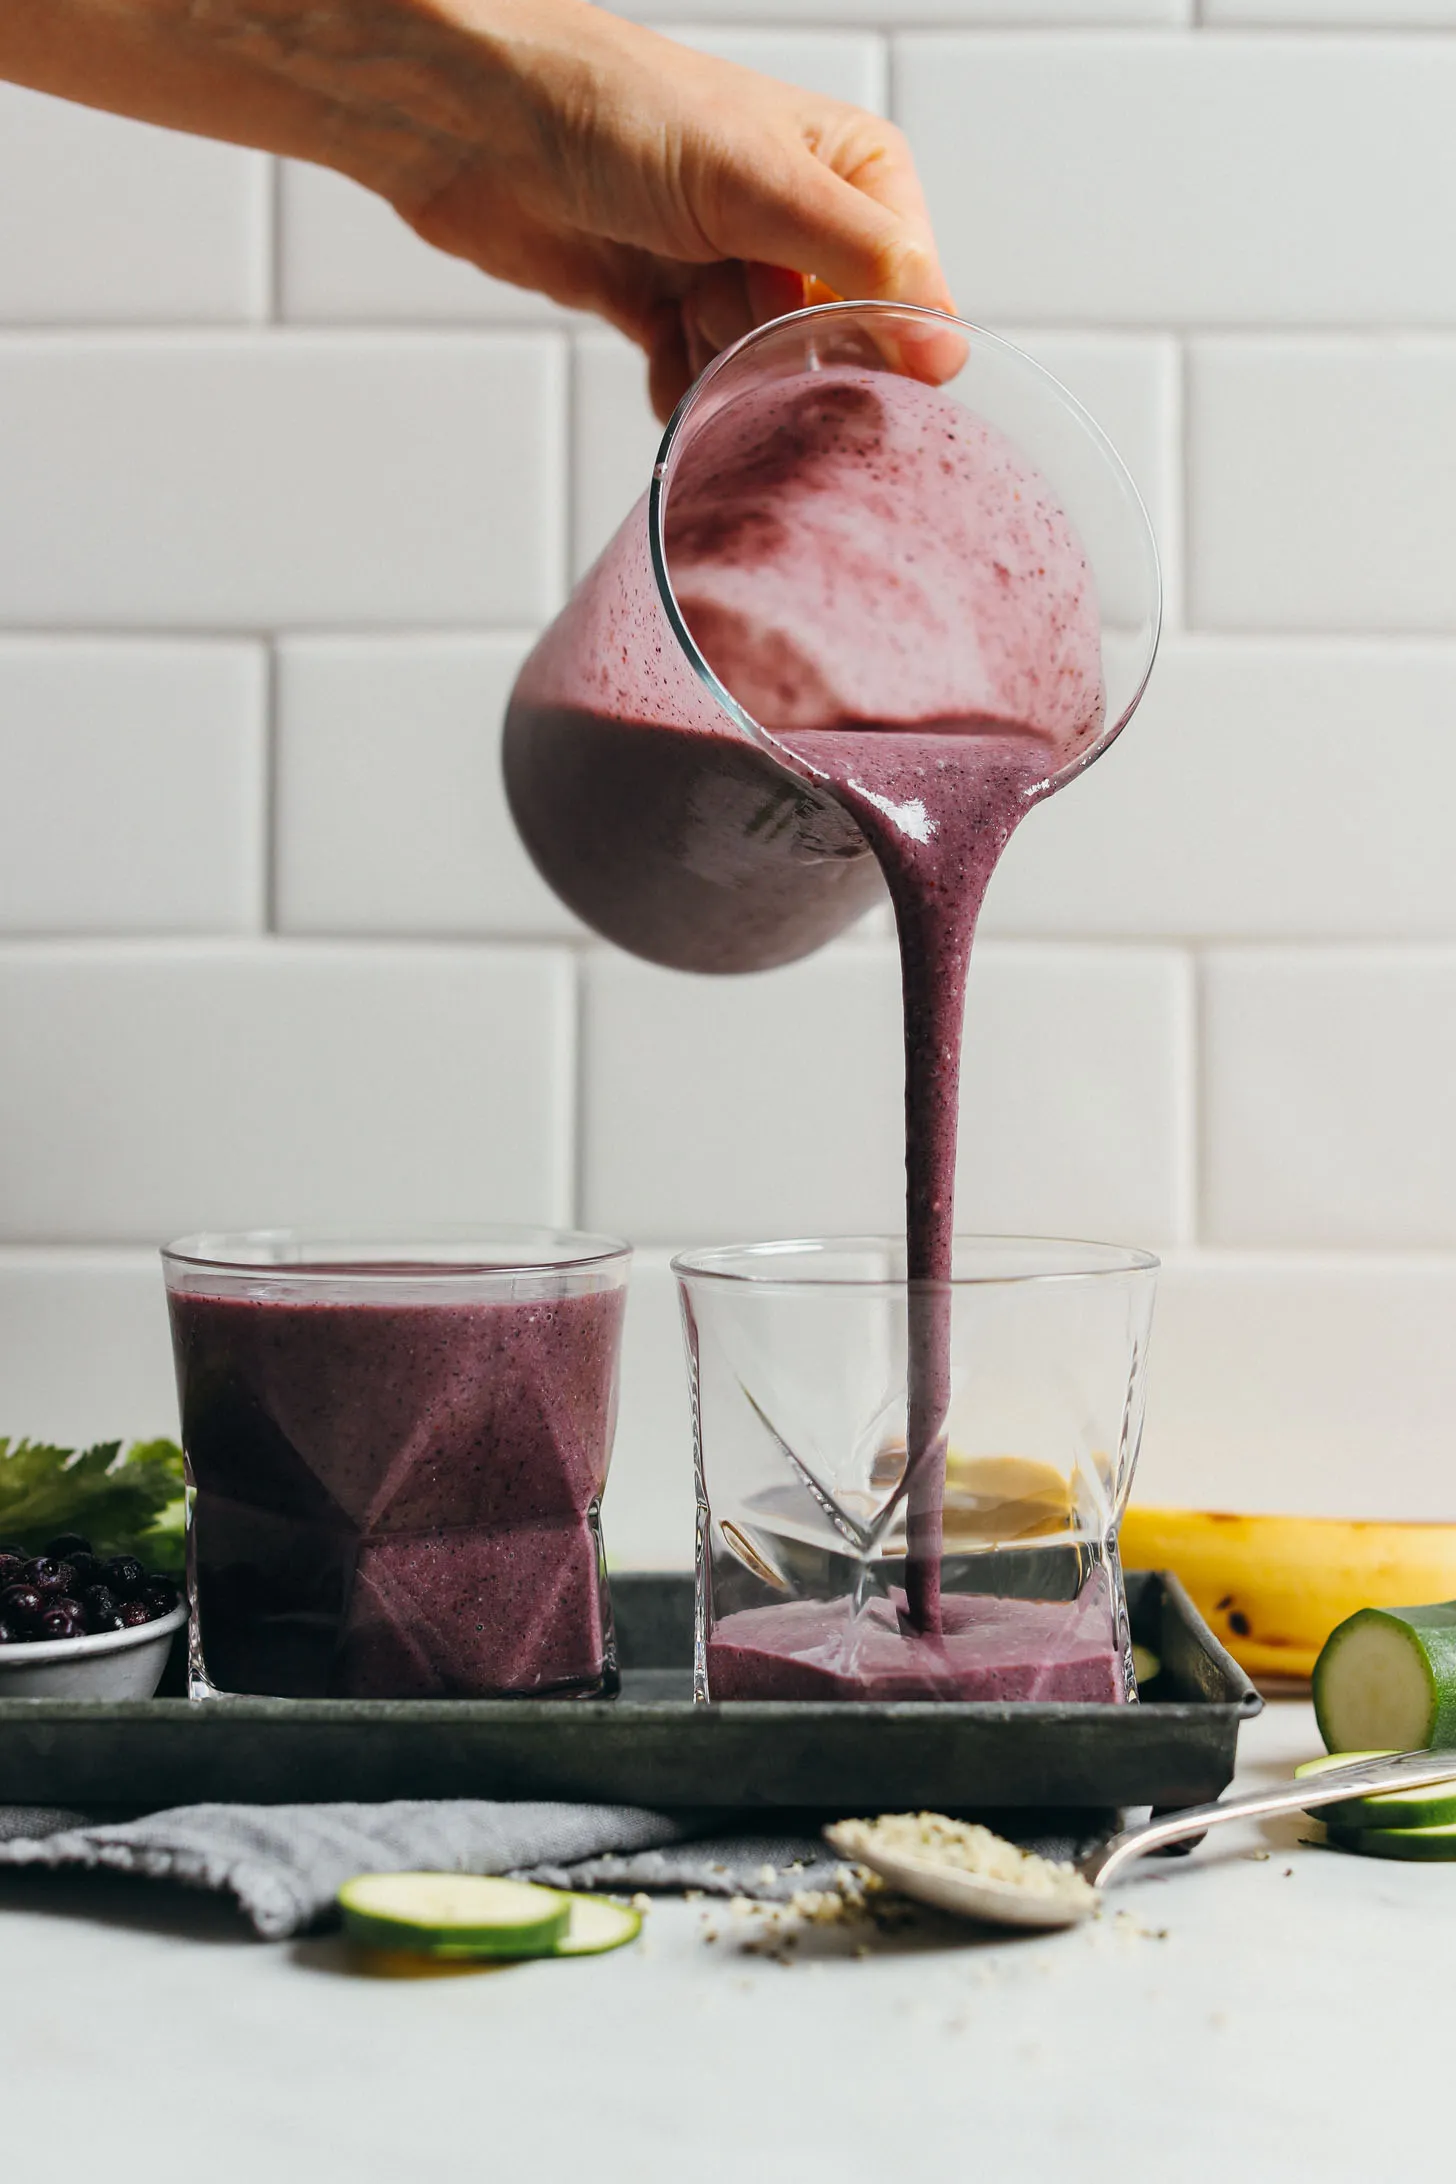 Pouring our healthy plant-based Zucchini Blueberry Smoothie into a glass